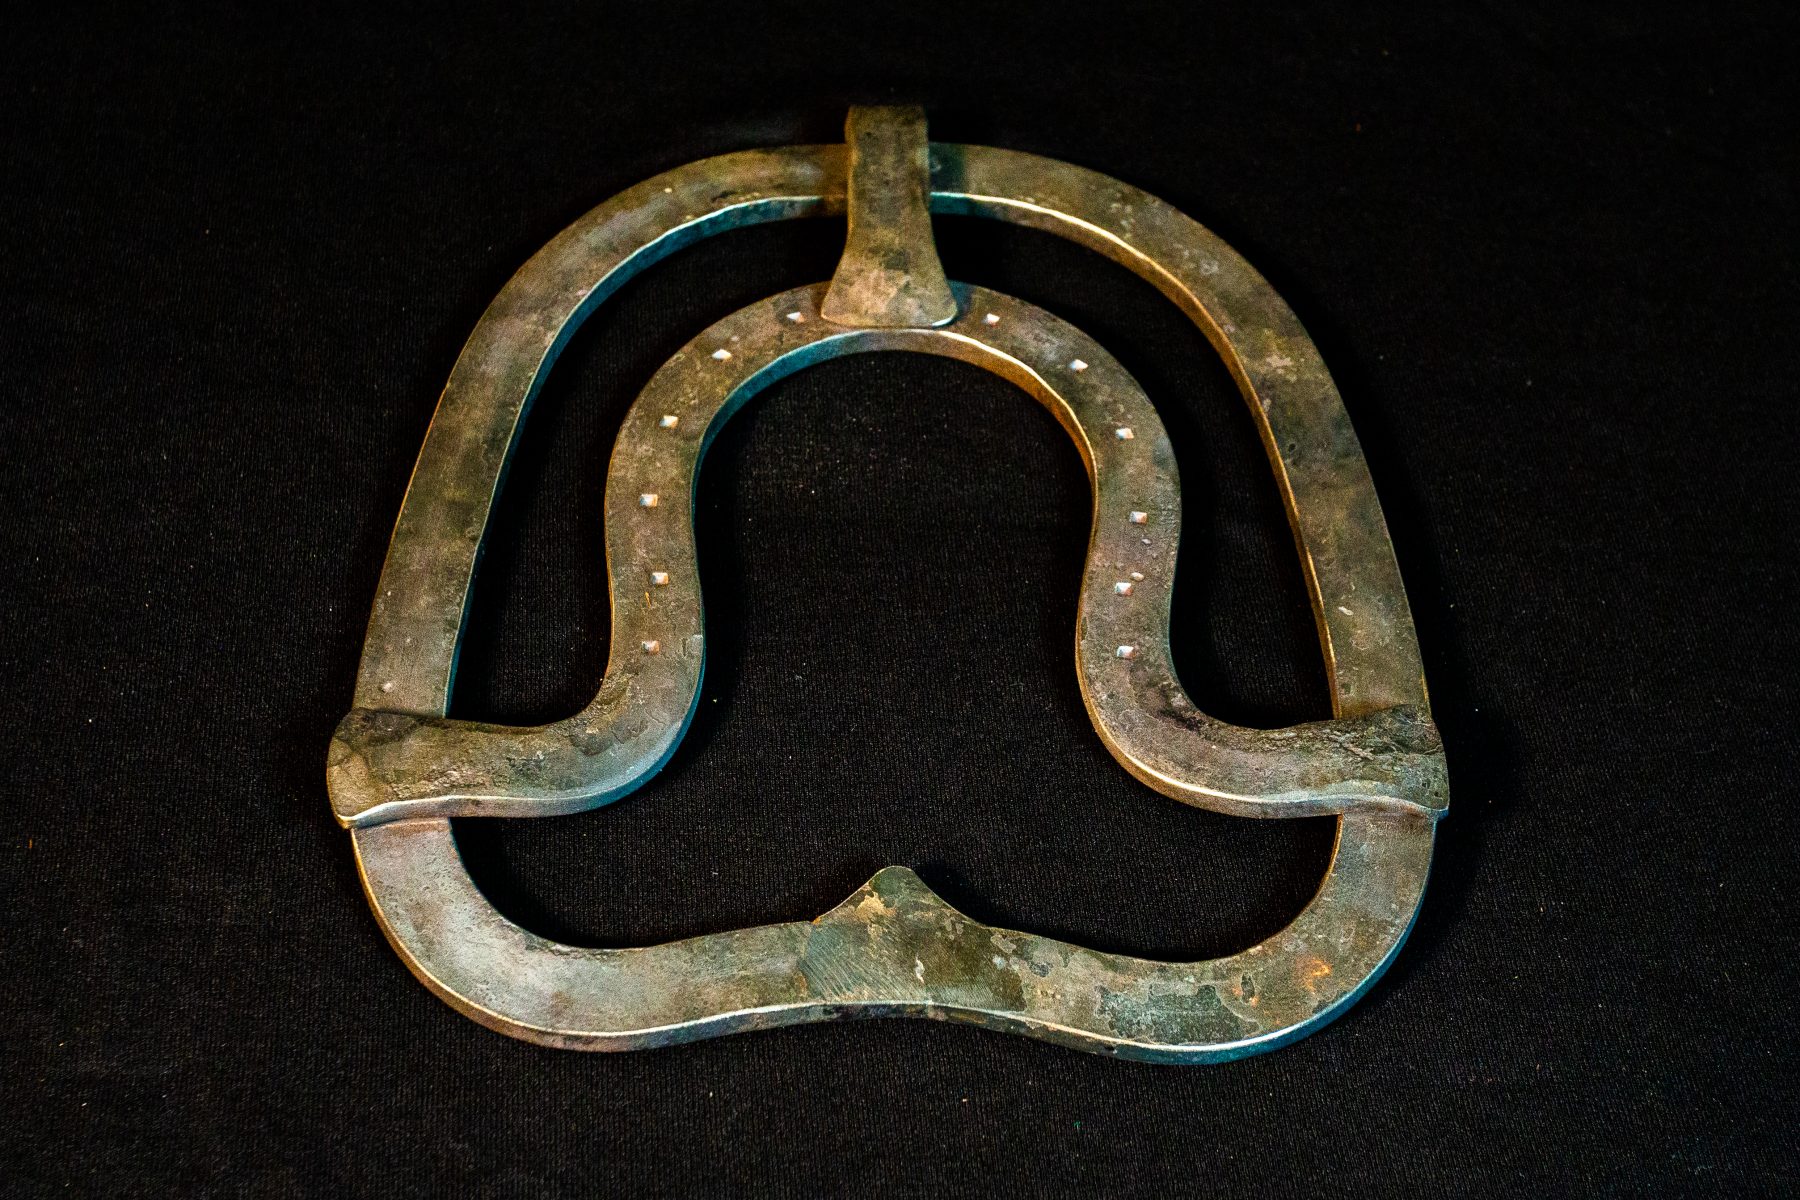 Tule horseshoe replica created by Patrick Daniel. Courtesy of the Locke Foundation, Museum of Chinese in America (MOCA) Collection.